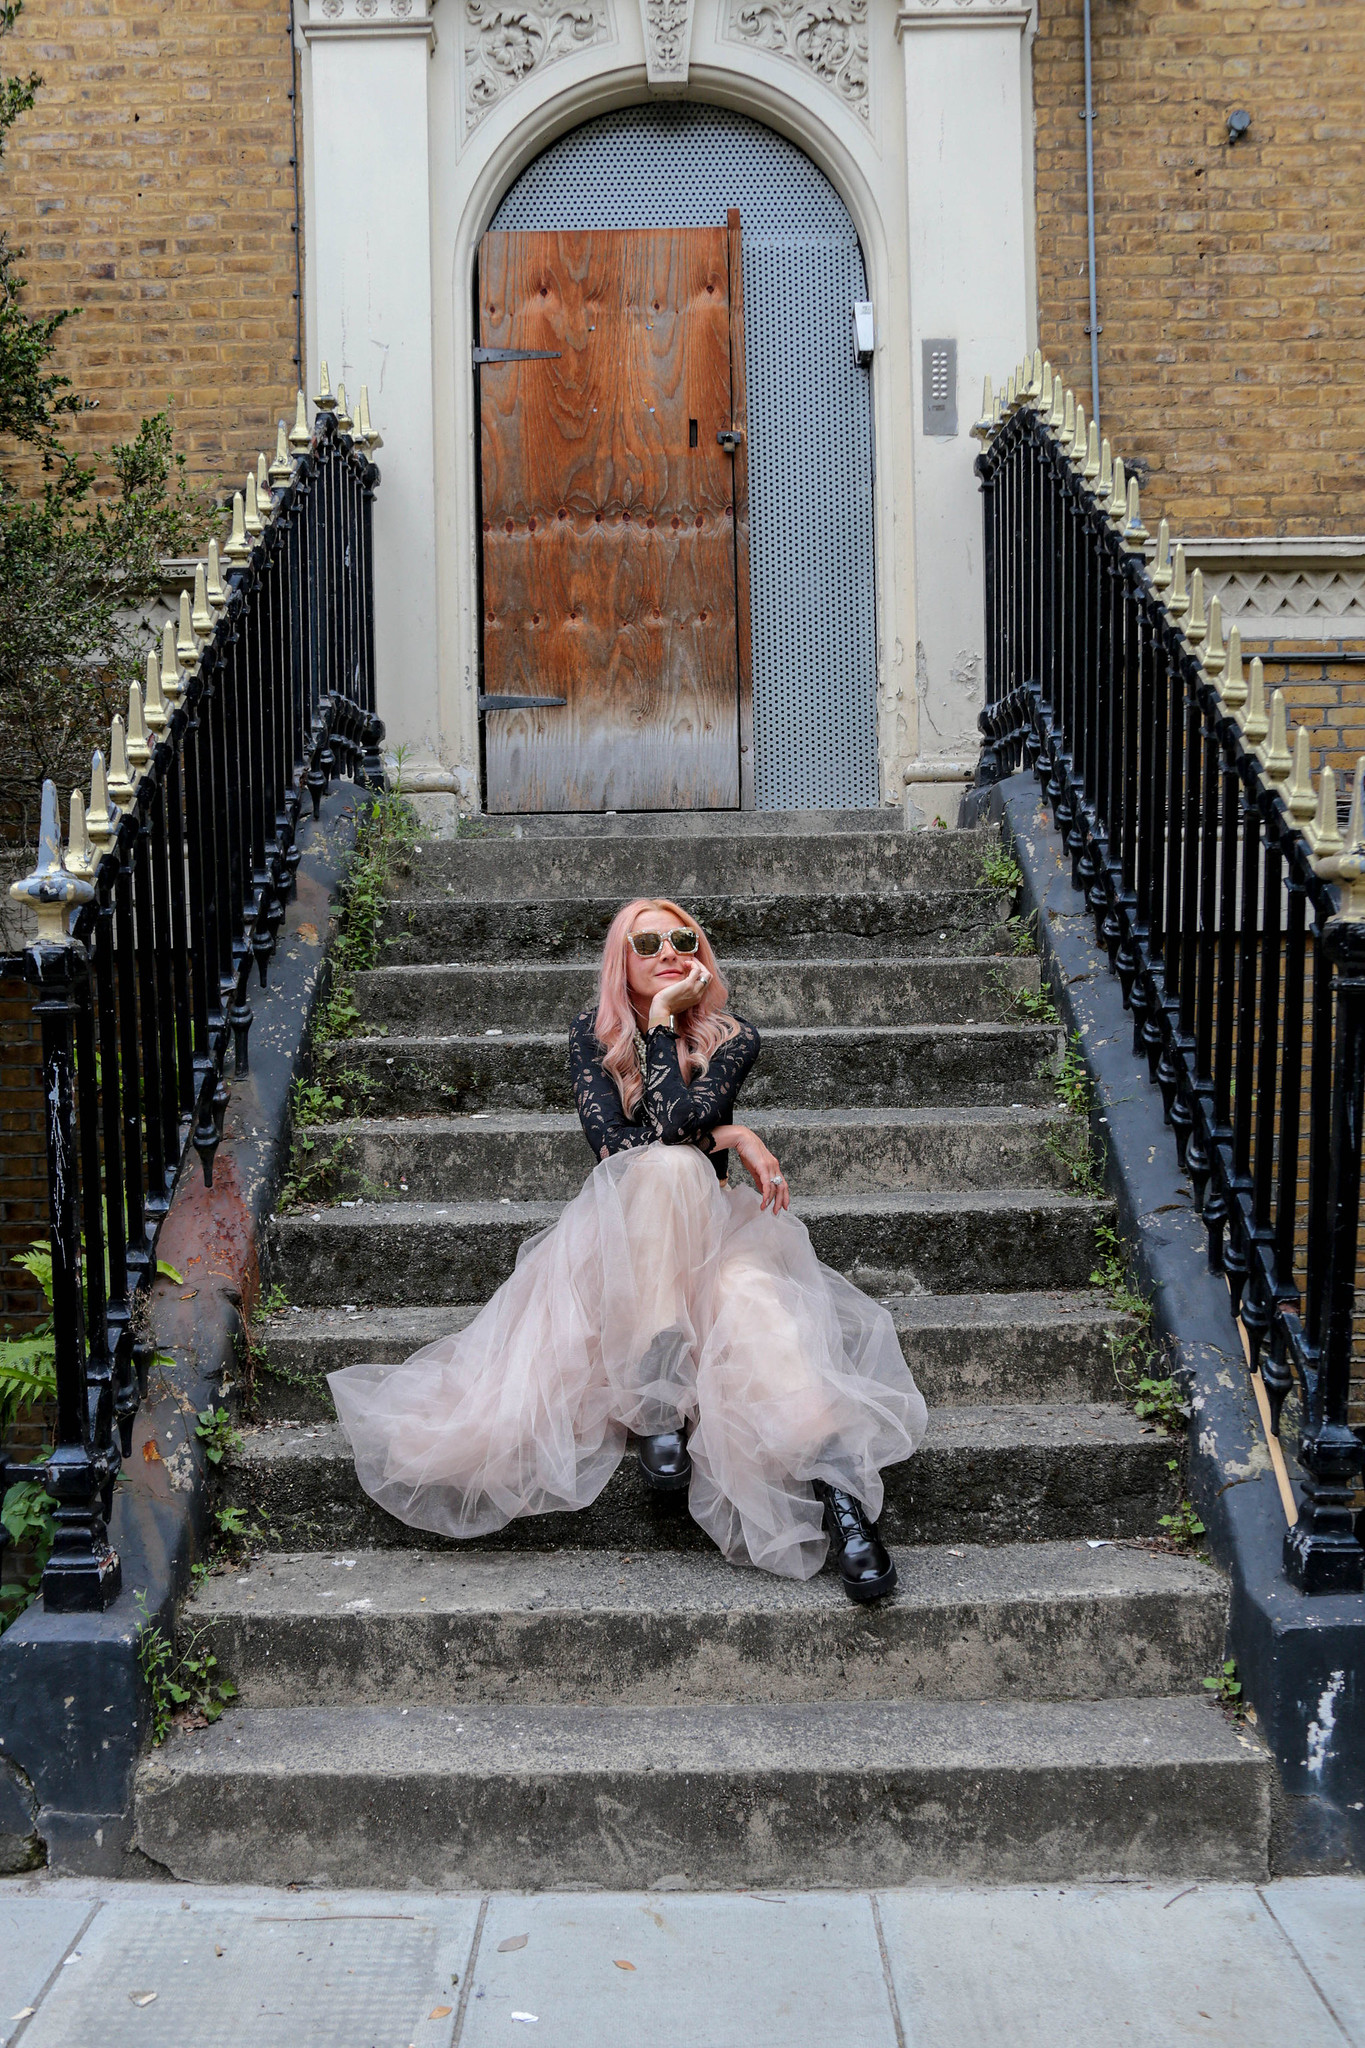 Giles Caldicott Photography: Catherine Summers AKA Not Dressed As Lamb | Wearing: cropped, long sleeve black lace top, pearl-effect square sunglasses, nude tulle maxi skirt, black lace-up boots | Sitting on the steps leading up to a boarded-up abandoned London town house